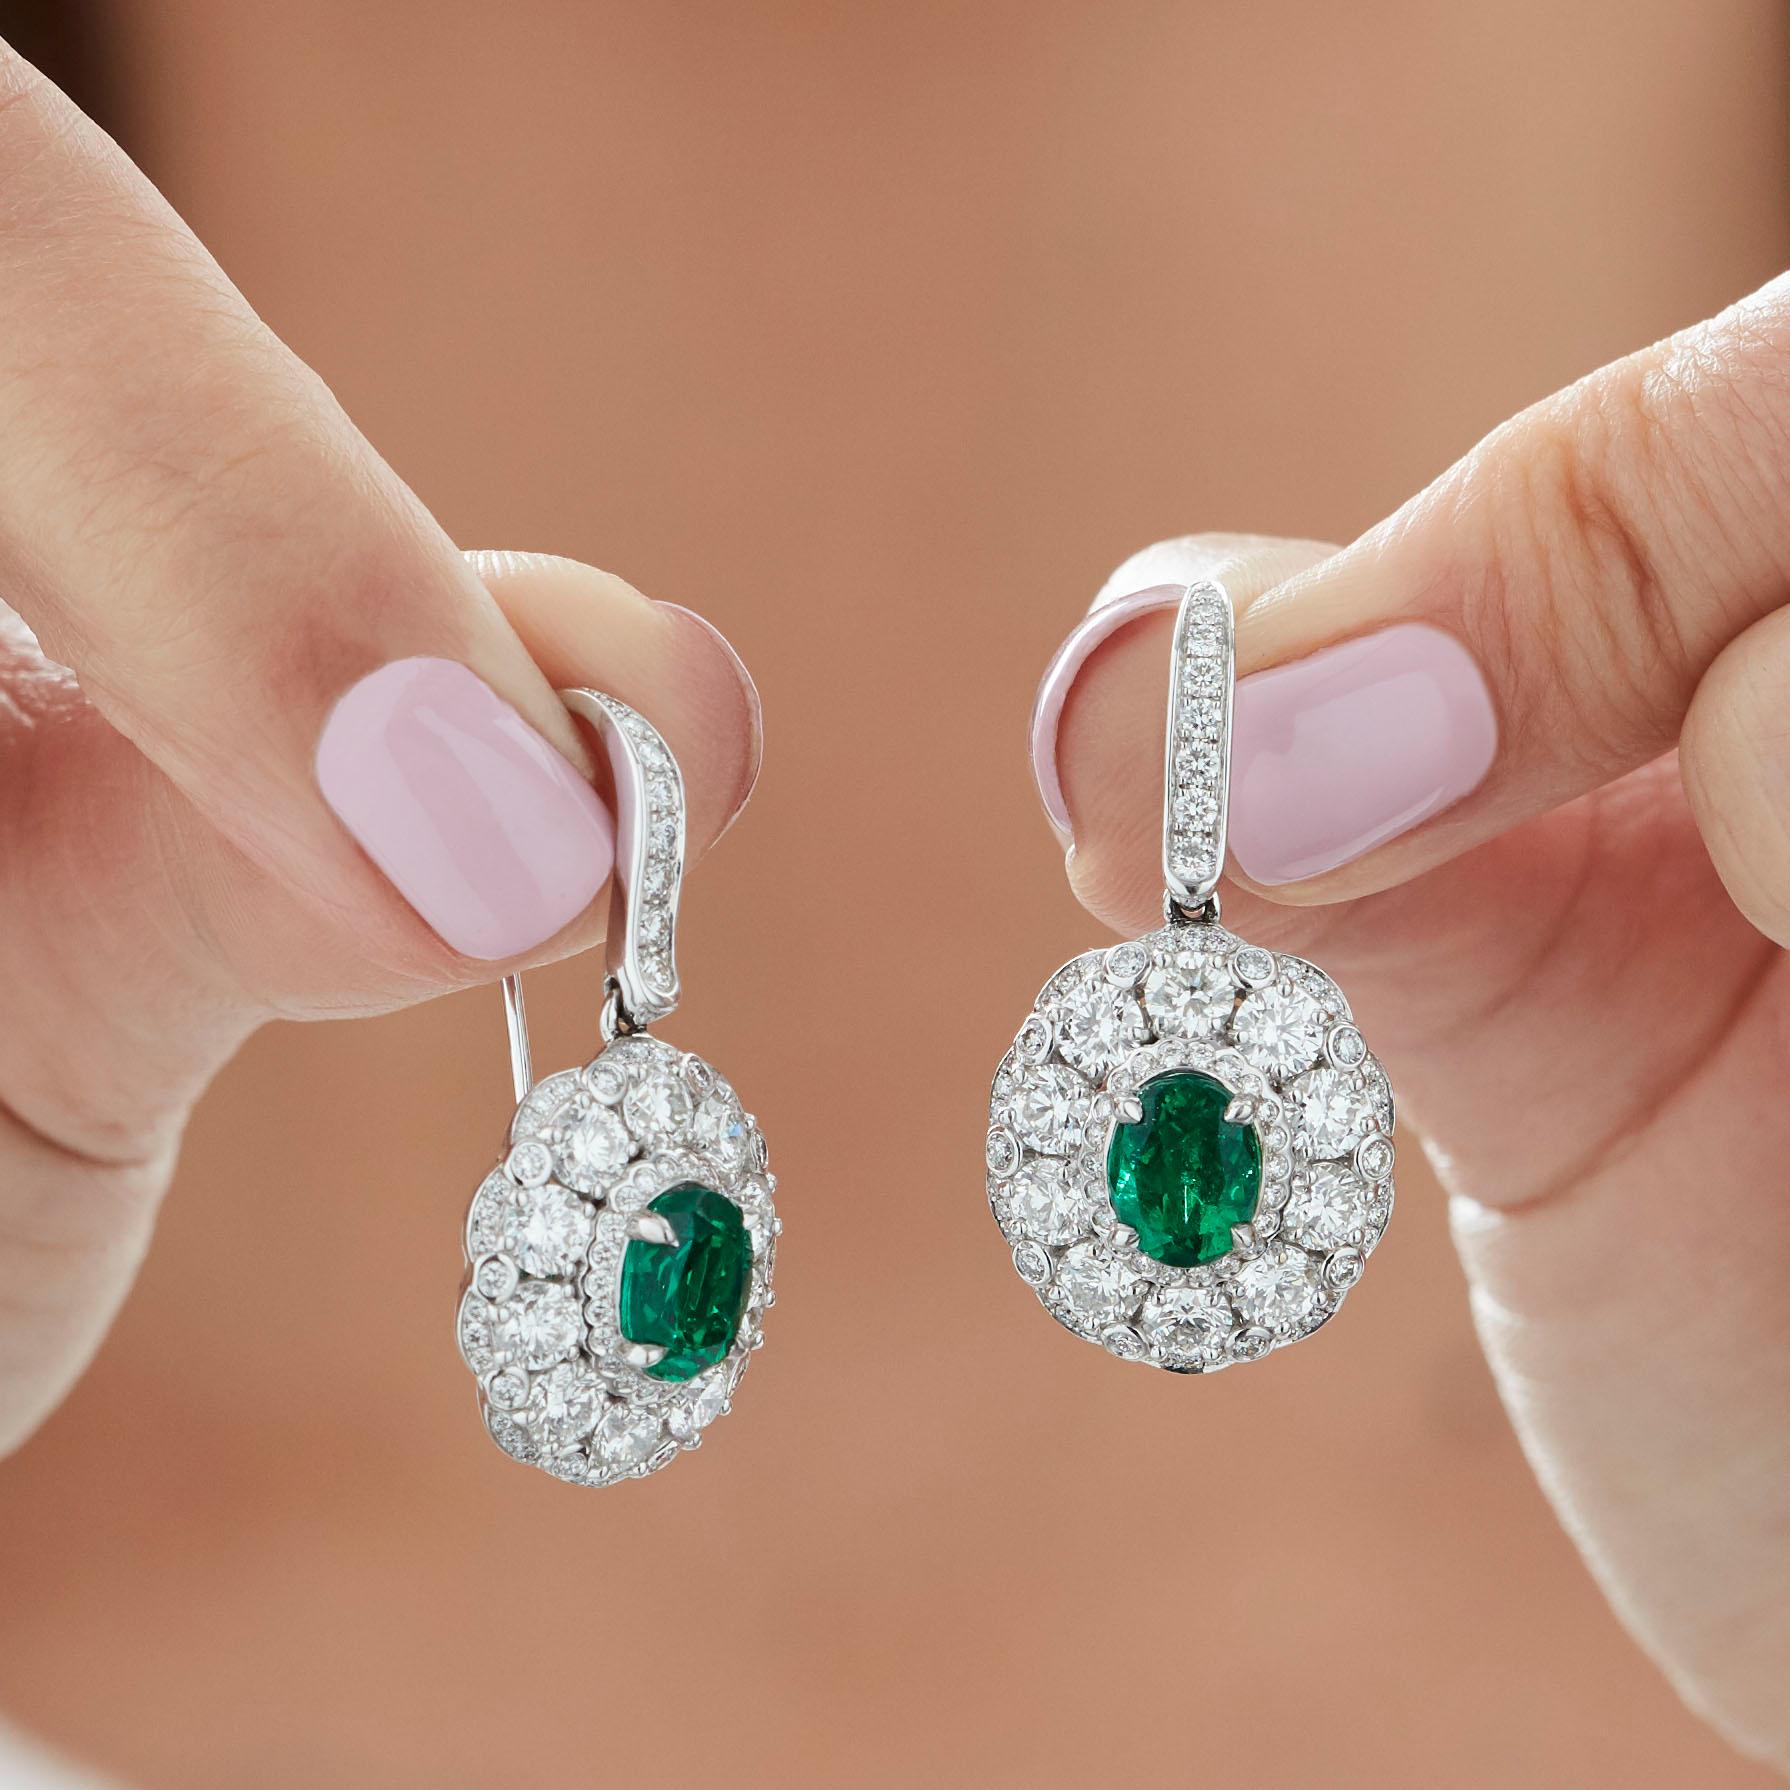 Garrard 'Jewelled Vault' 18 Karat White Gold Emerald and White Diamond Earrings In New Condition For Sale In London, London